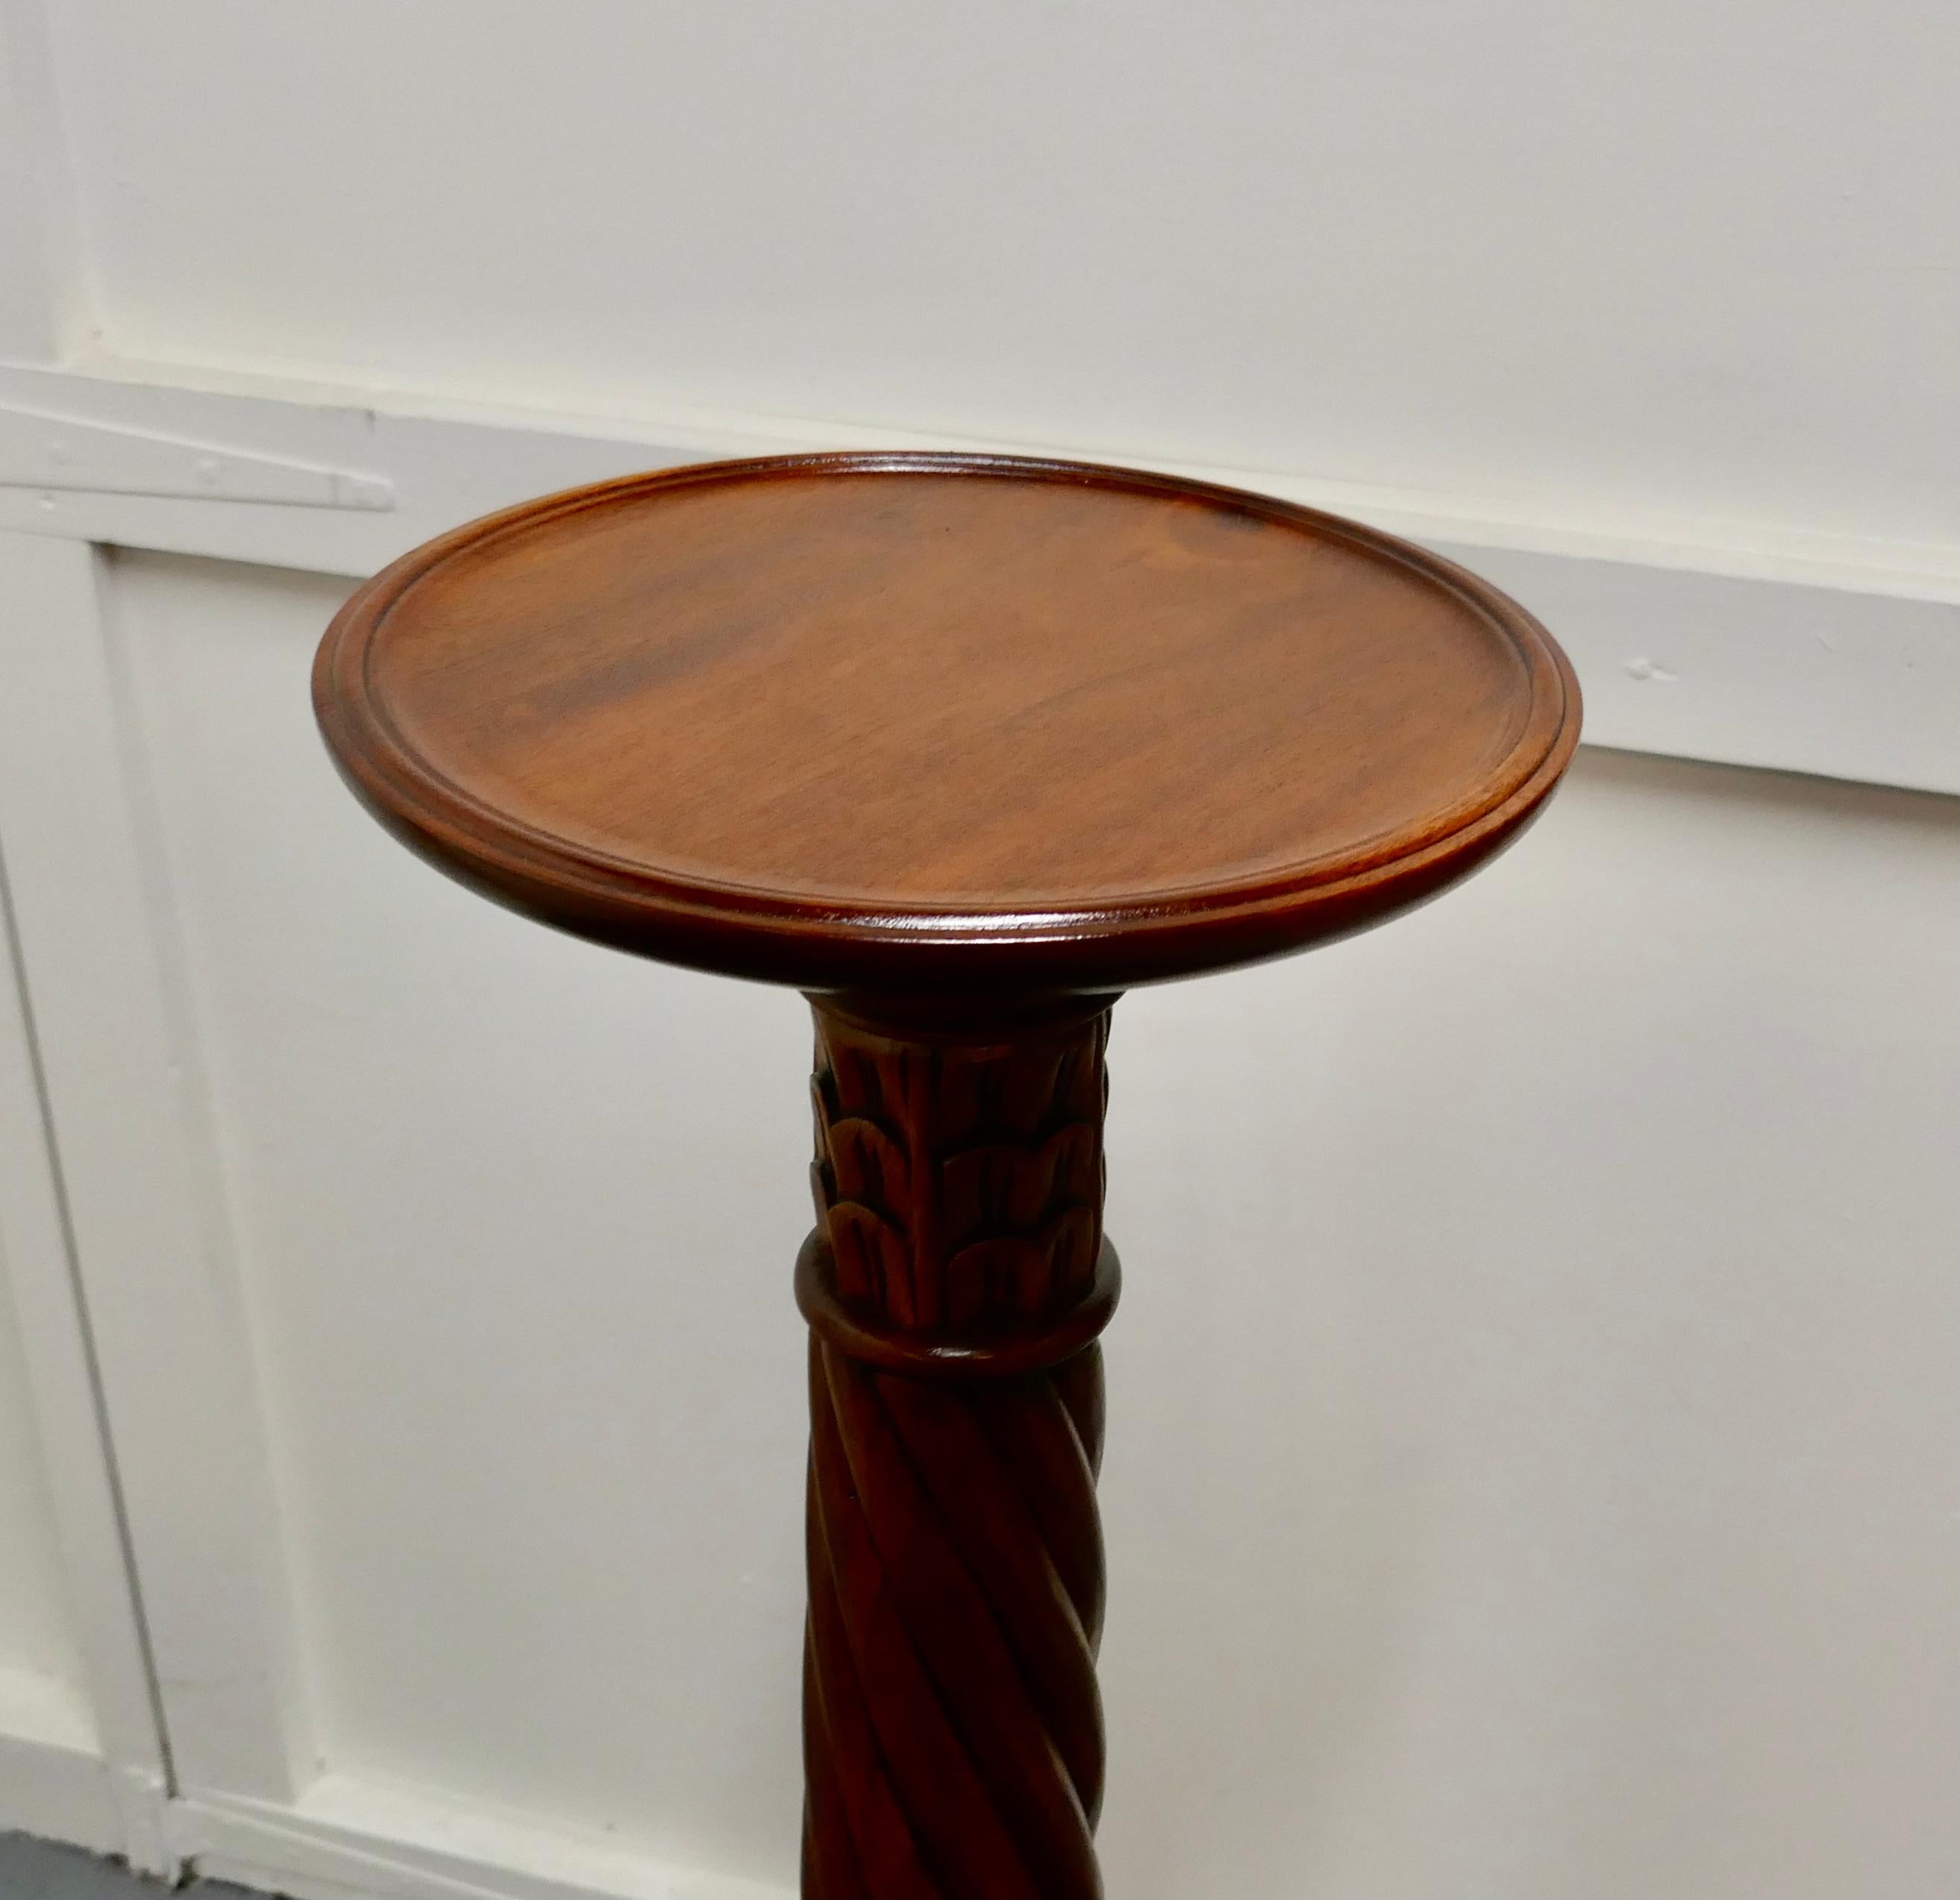 A tall pair of mahogany torchère or lamp stands

This is a fine quality pair of mahogany torchère they have a circular flat top with a raised moulded rim. They each stand on a carved 3 footed base with detailed acanthus leaf carving both to the